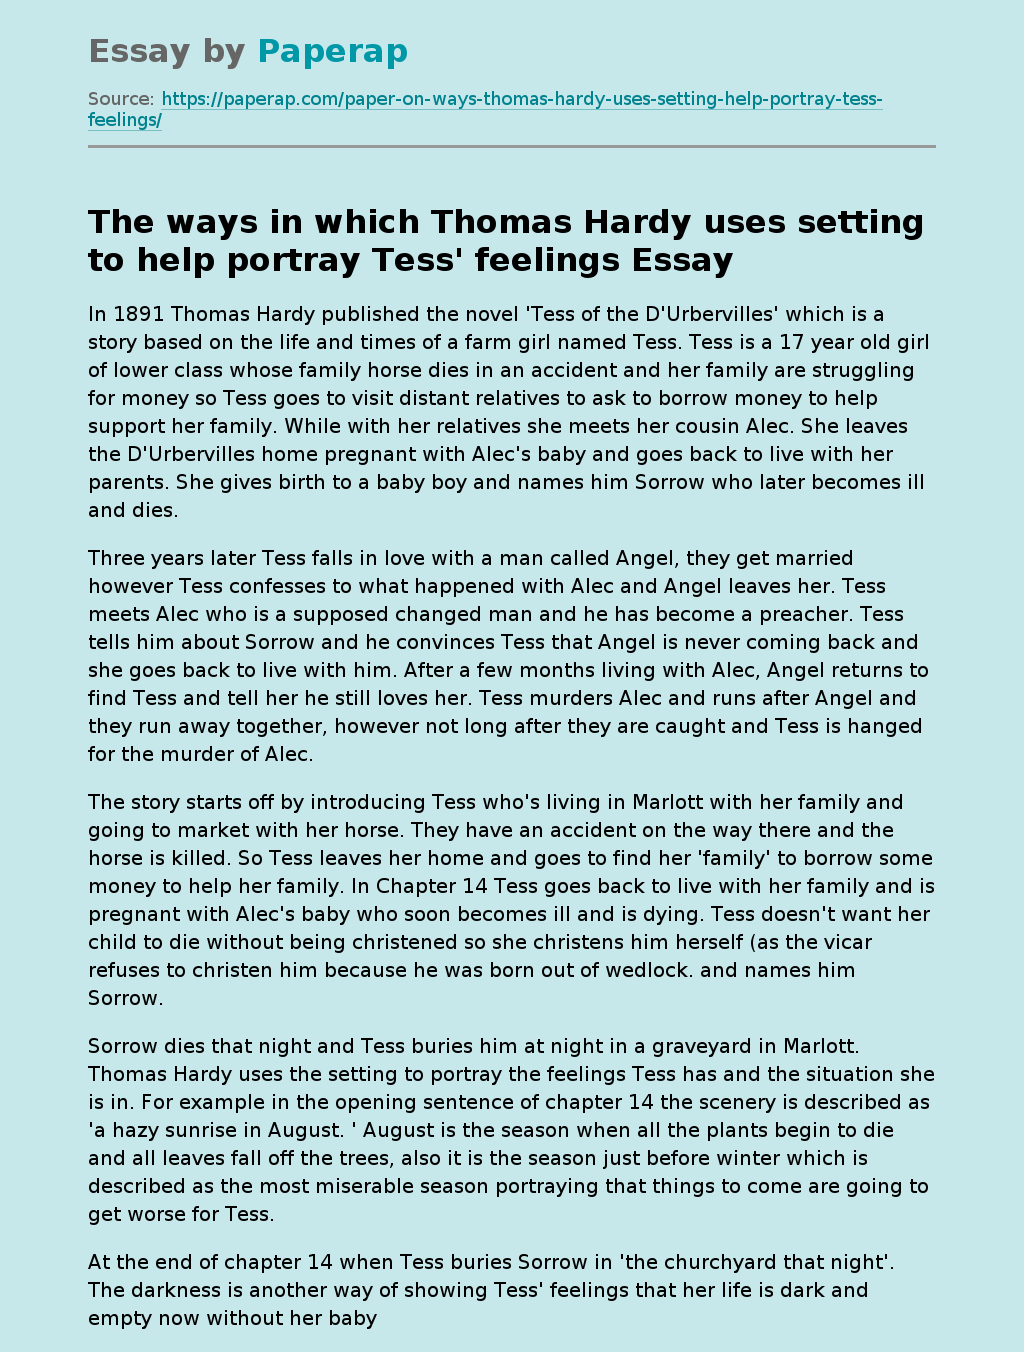 The ways in which Thomas Hardy uses setting to help portray Tess' feelings